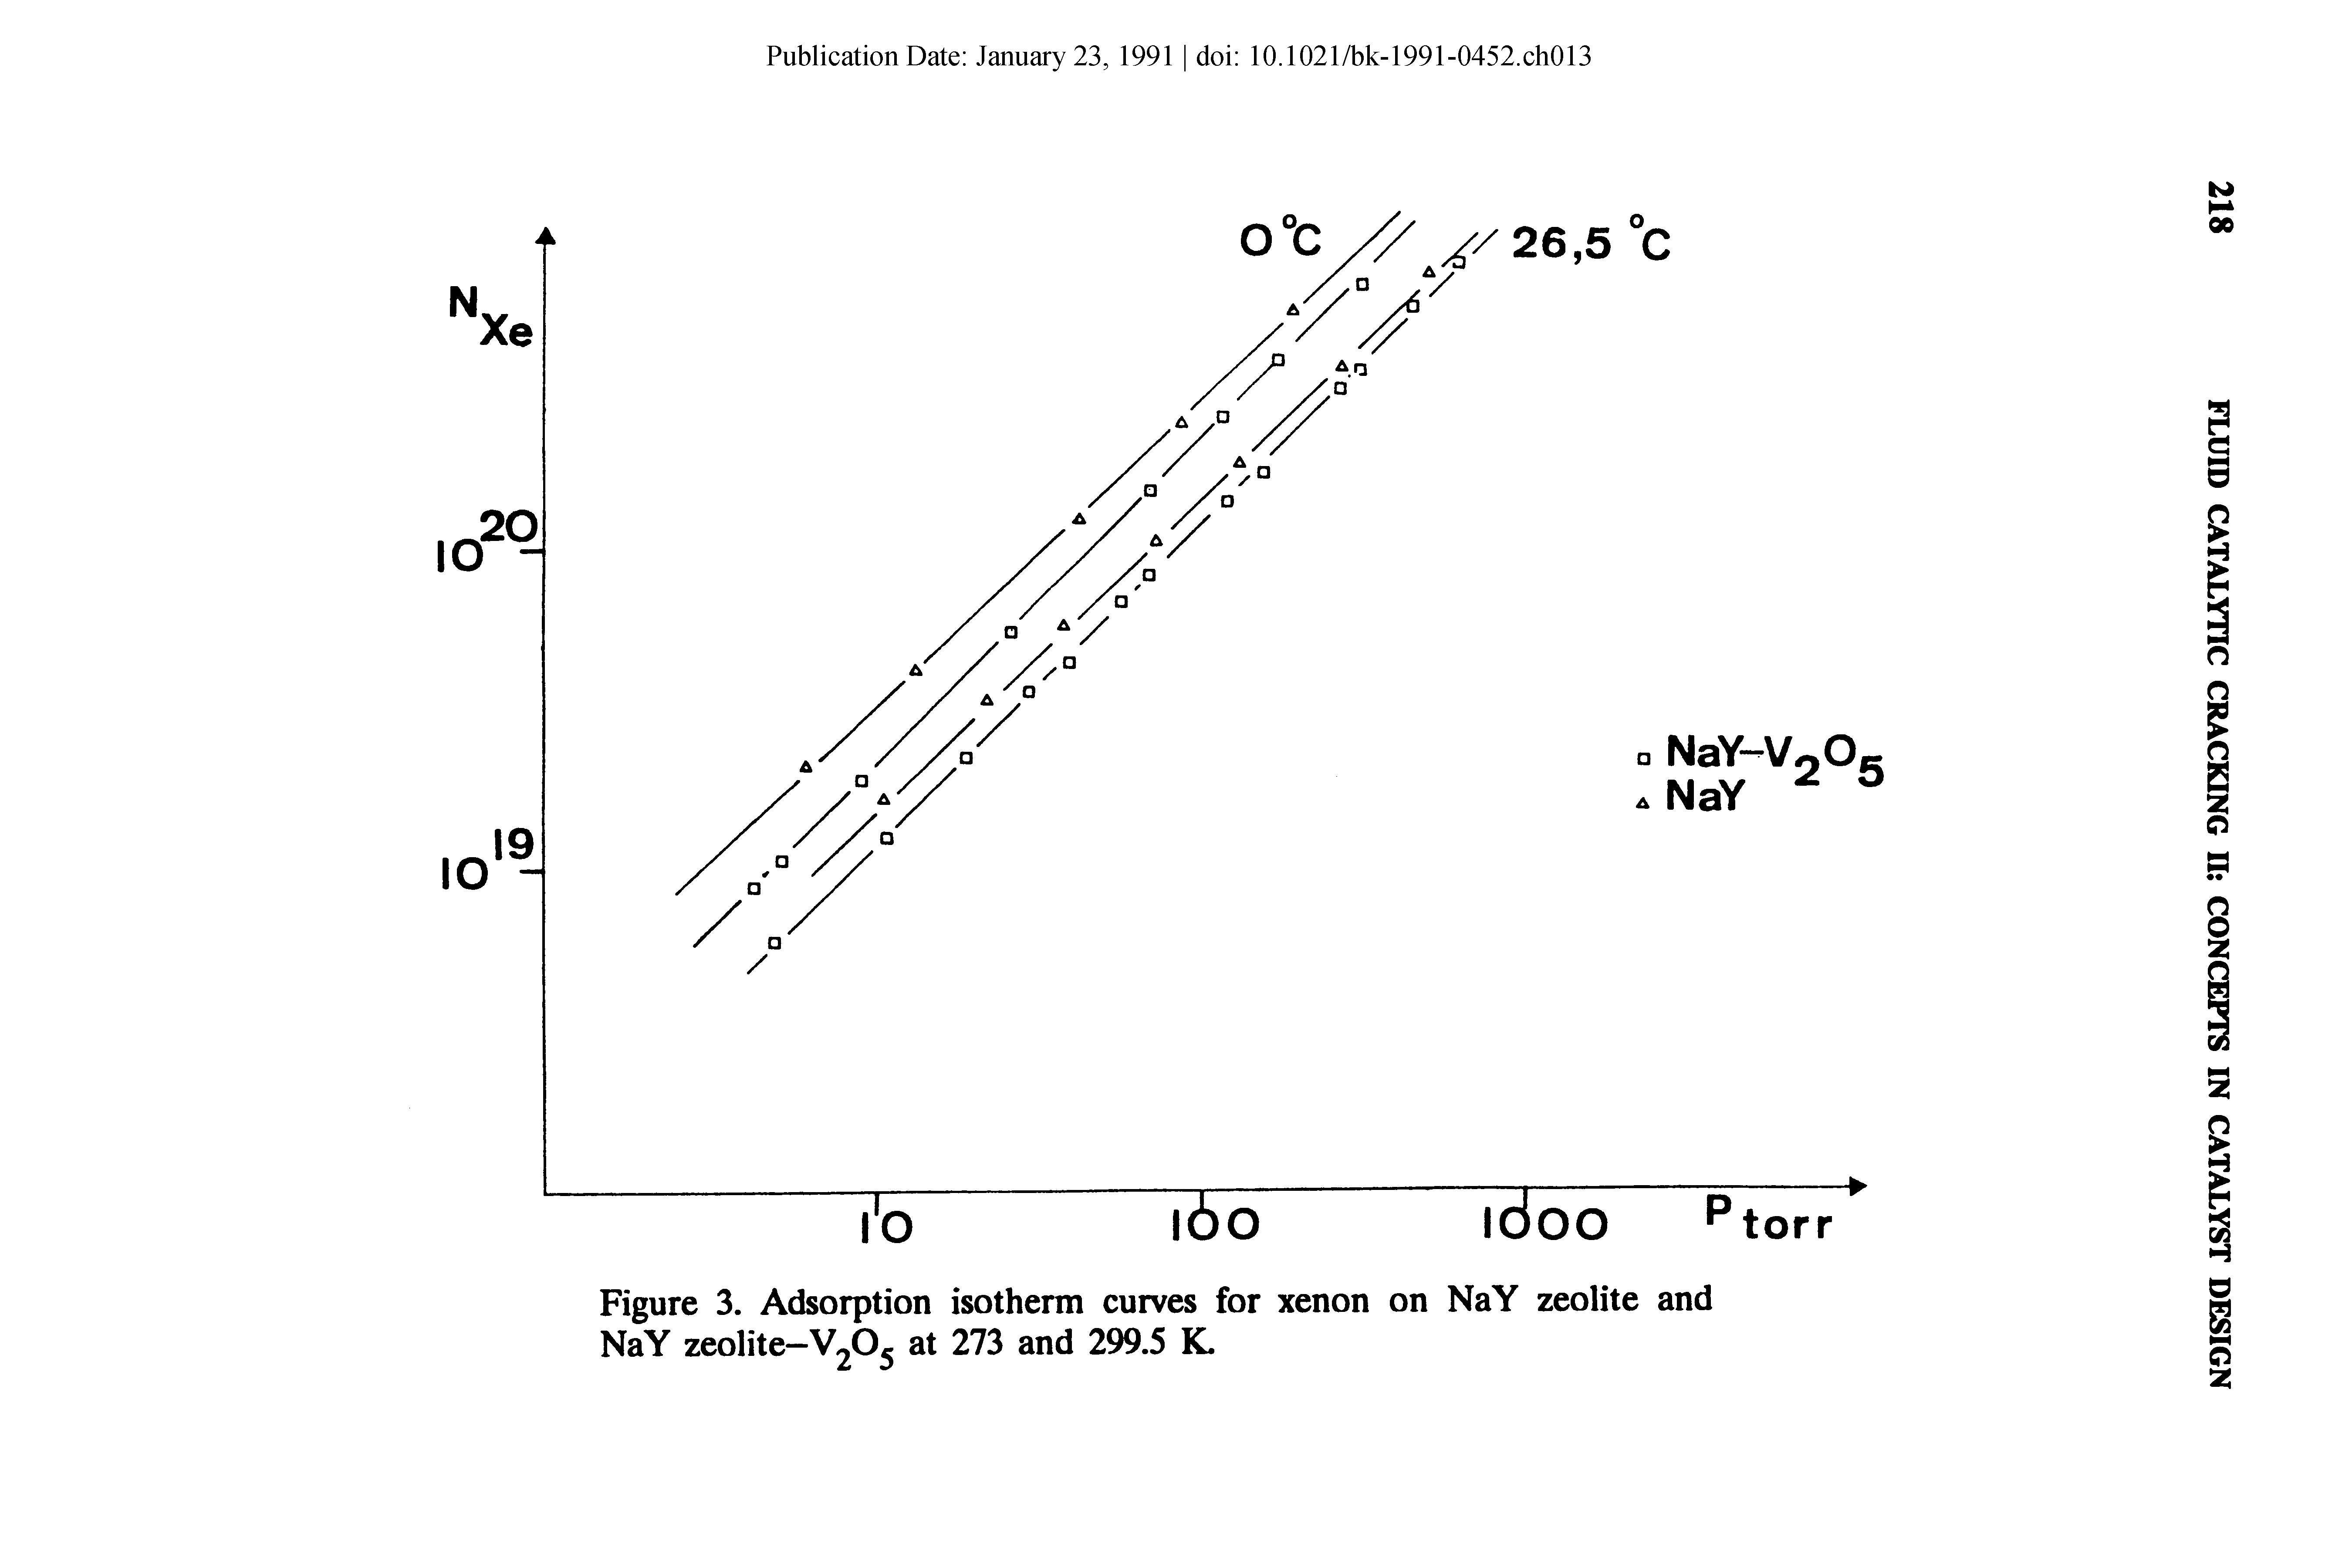 Figure 3. Adsorption isotherm curves for xenon on NaY zeolite and NaY zeolite-V205 at 273 and 299.5 K.